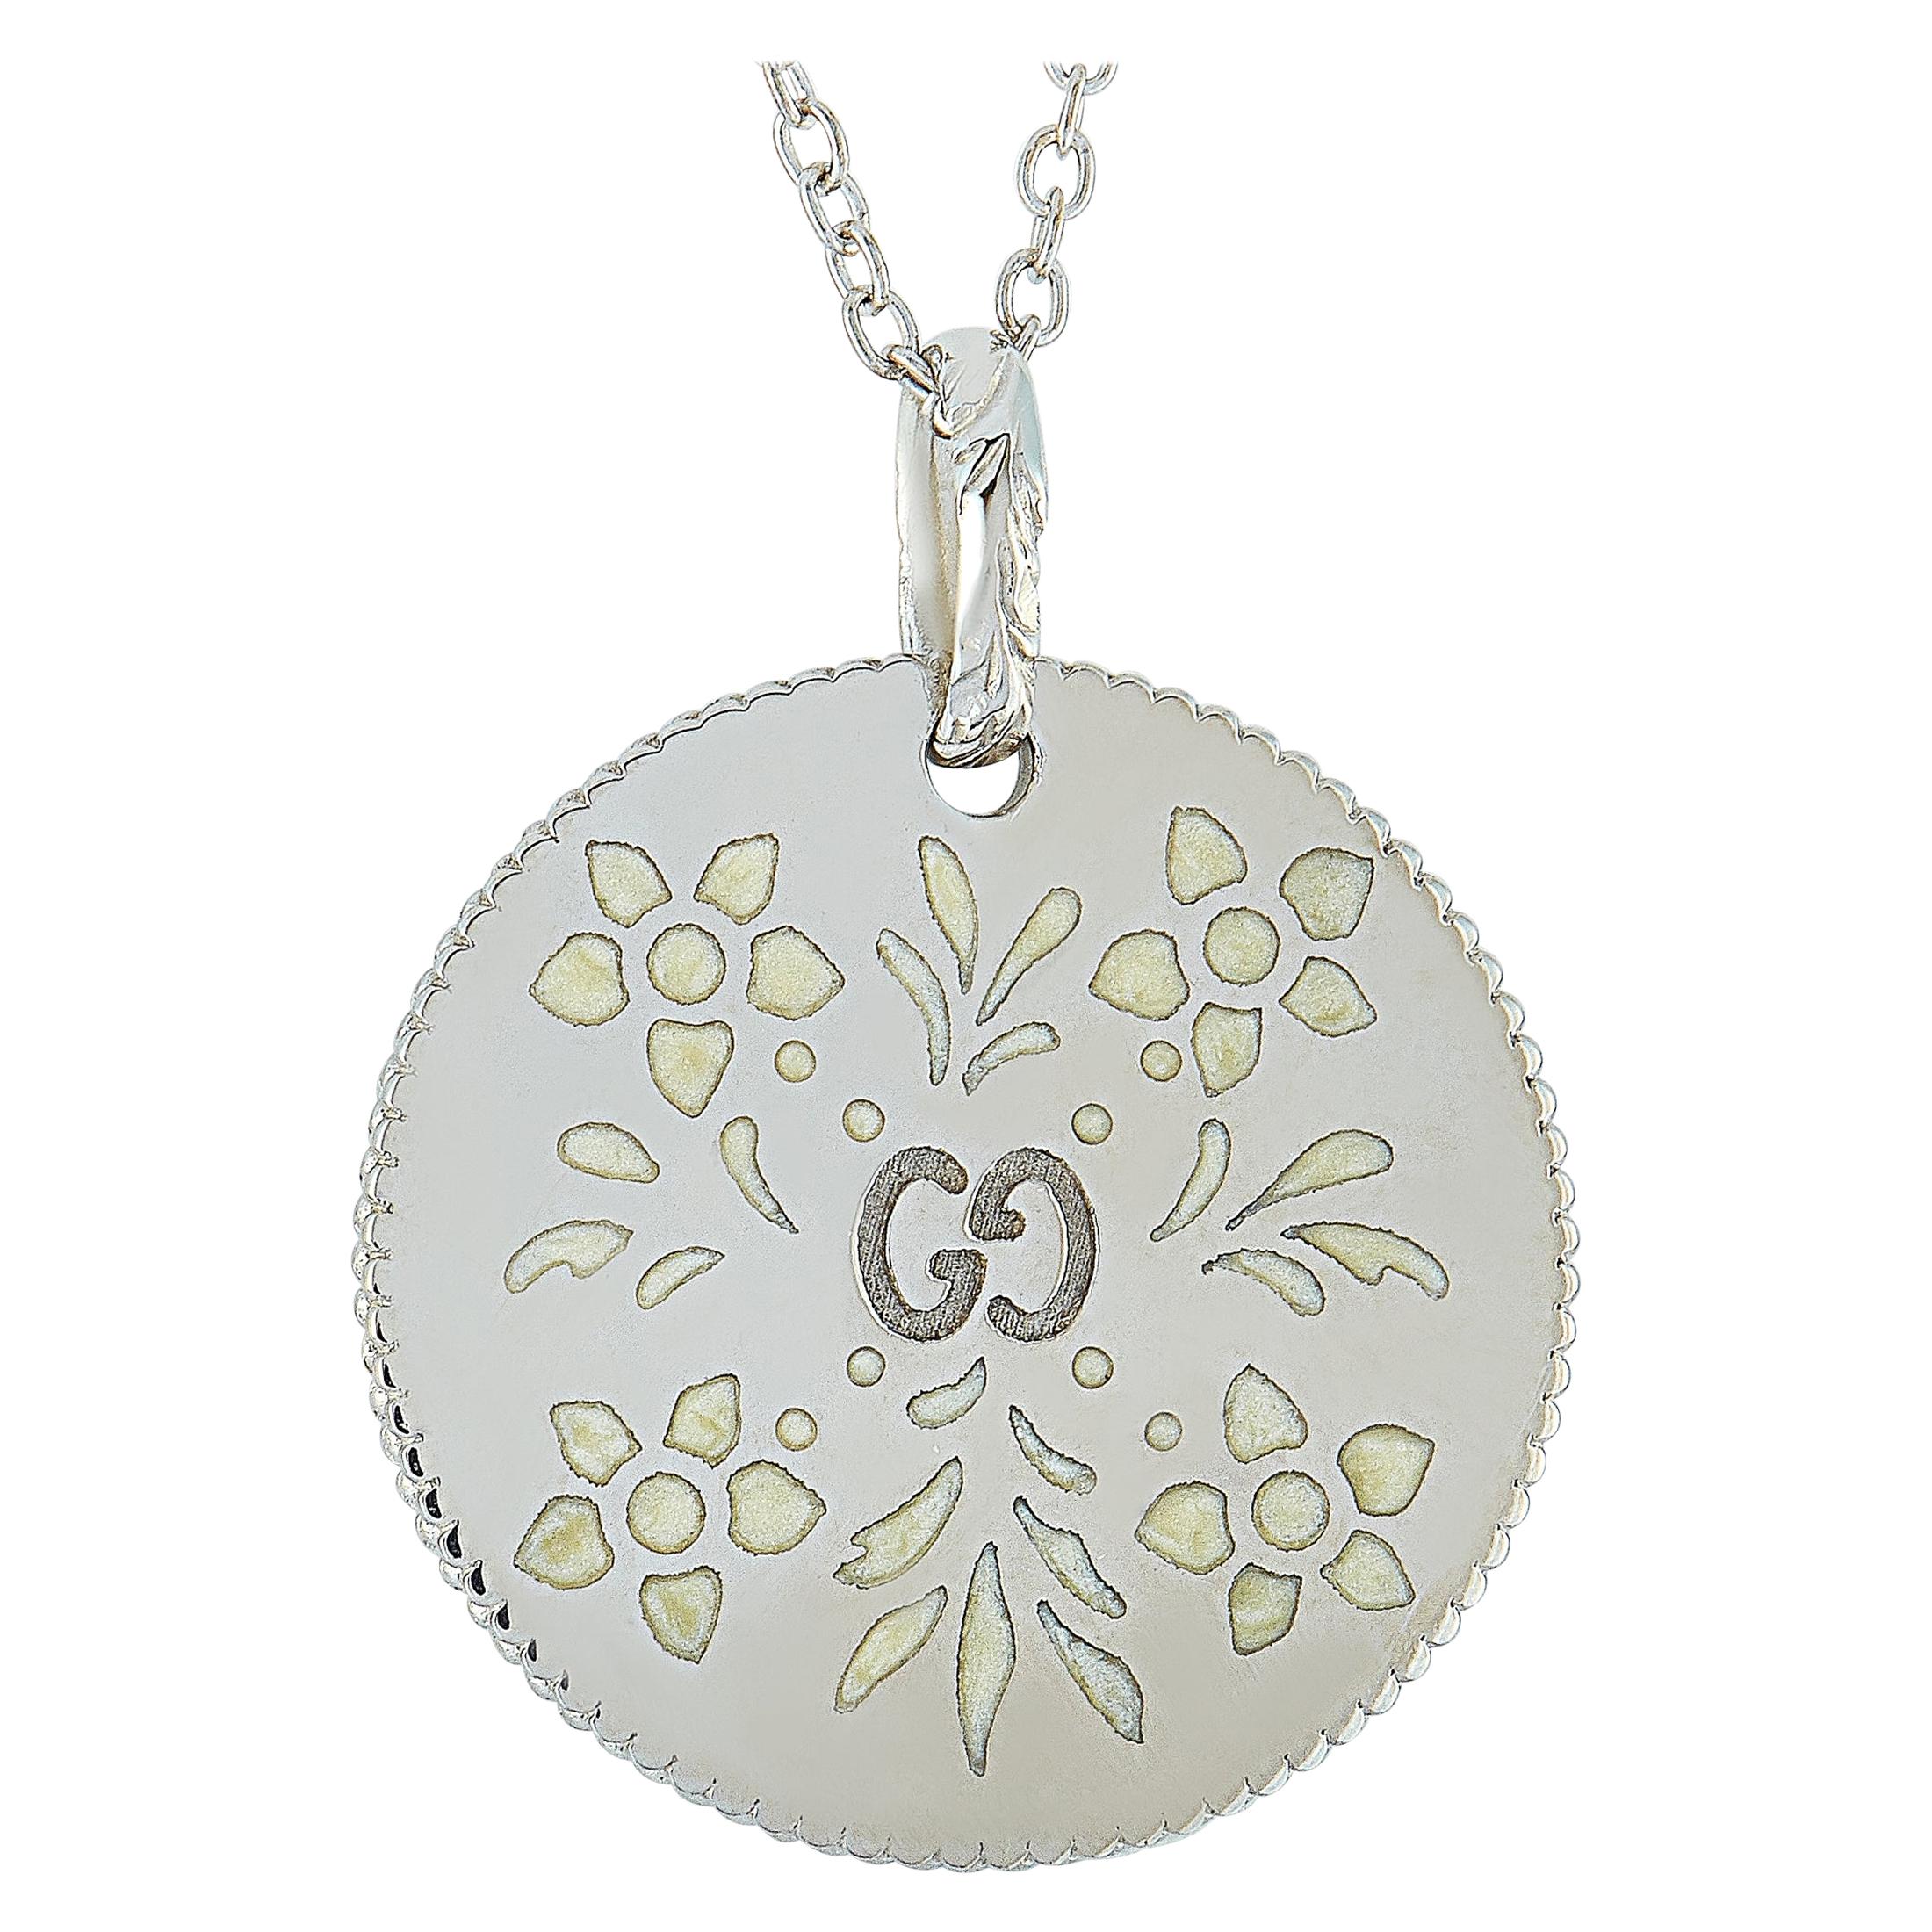 Gucci Icon Blooms 18 Karat White Gold and White Enamel Necklace